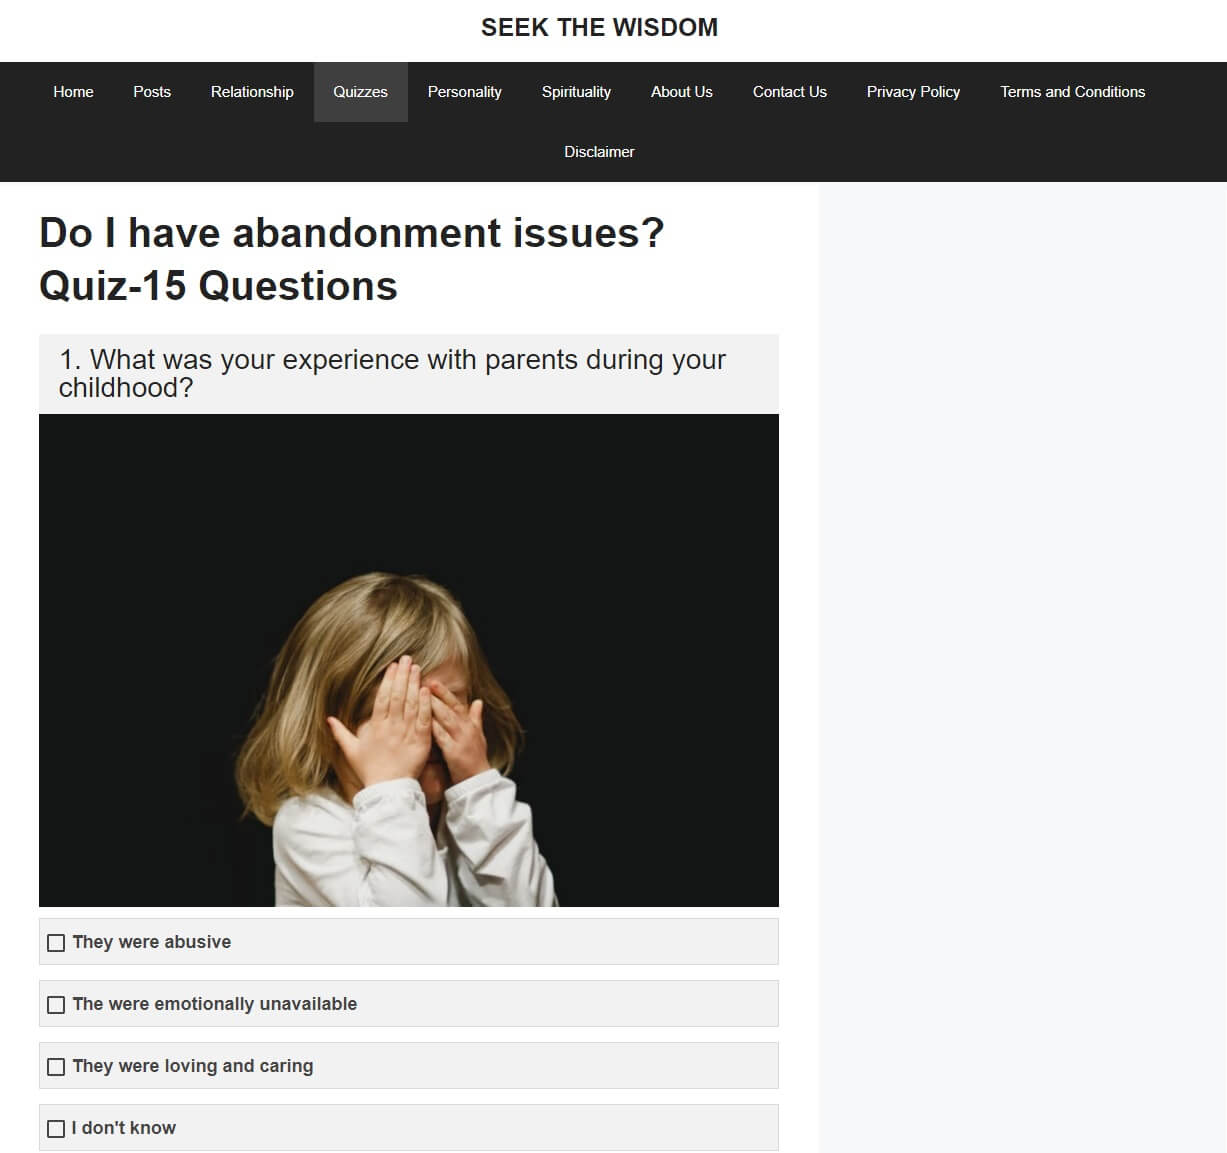 fear of abandonment | signs of abandonment issues | signs of abandonment issues in adults